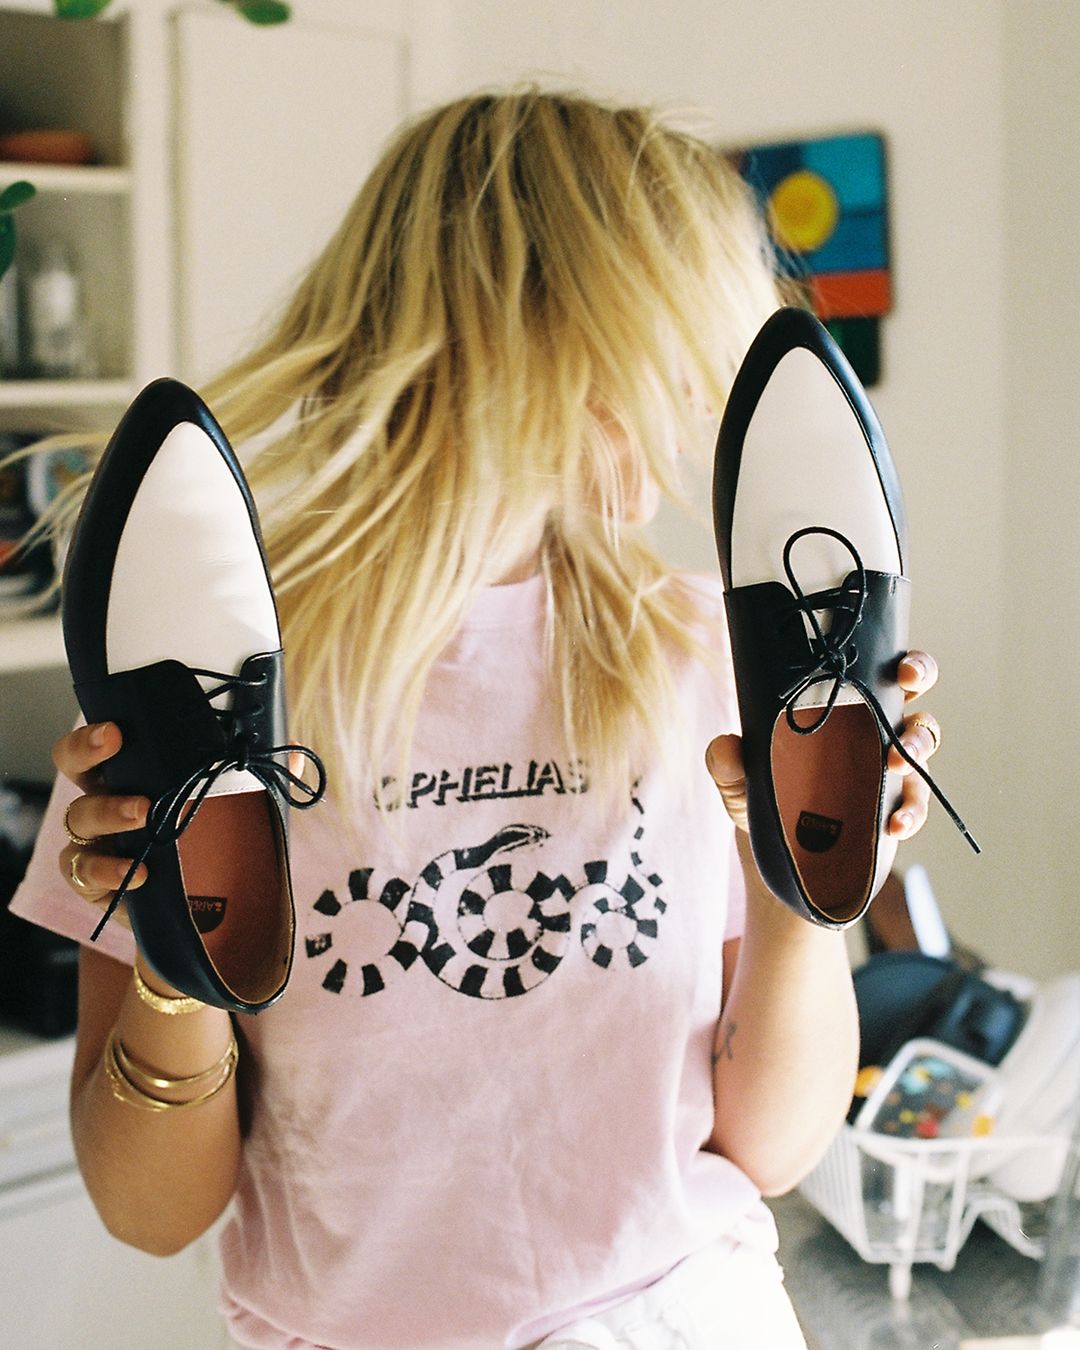 Bared_Footwear_Womens_Collaboration_Anna_Feller_Penguin_Black_White_Leather_Lace_Ups_Pink_Tshirt